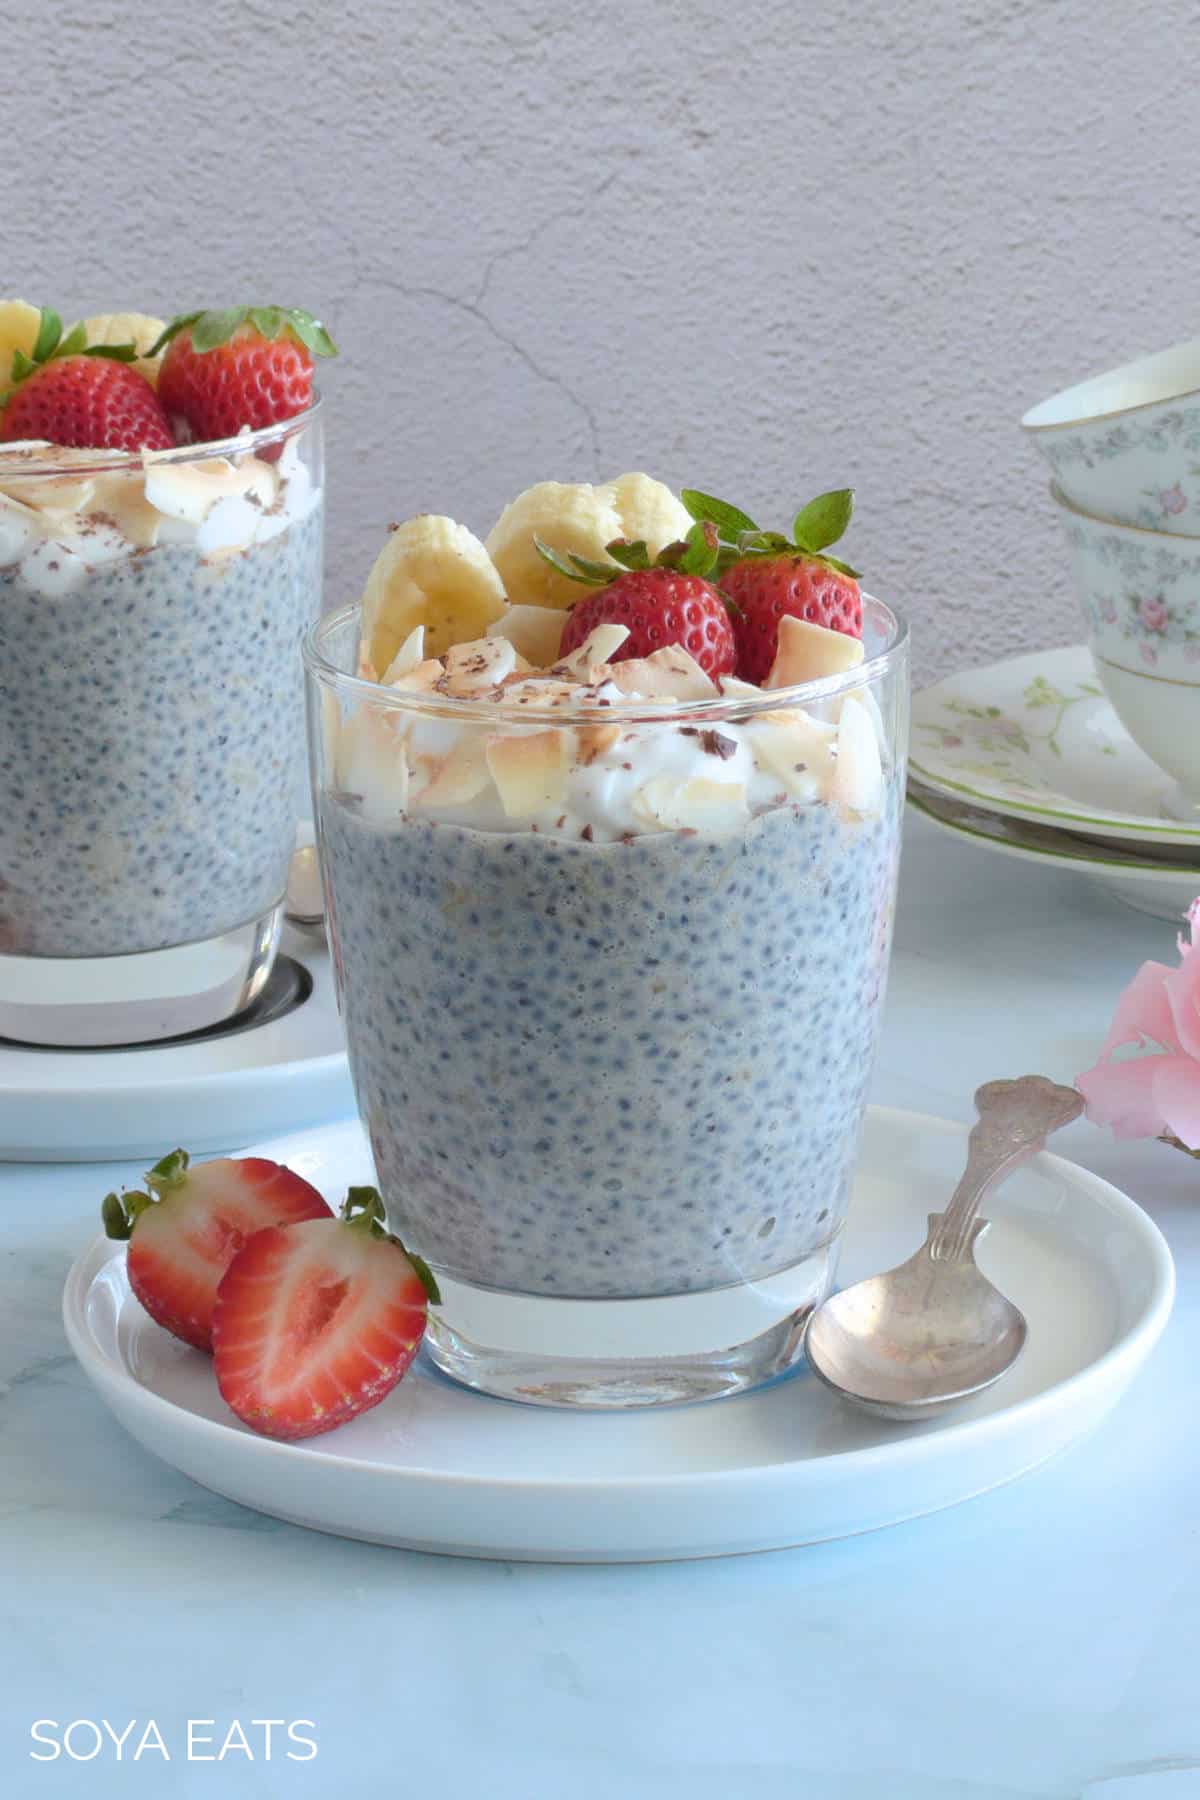 Image of two chia banana puddings on white plates and spoons.